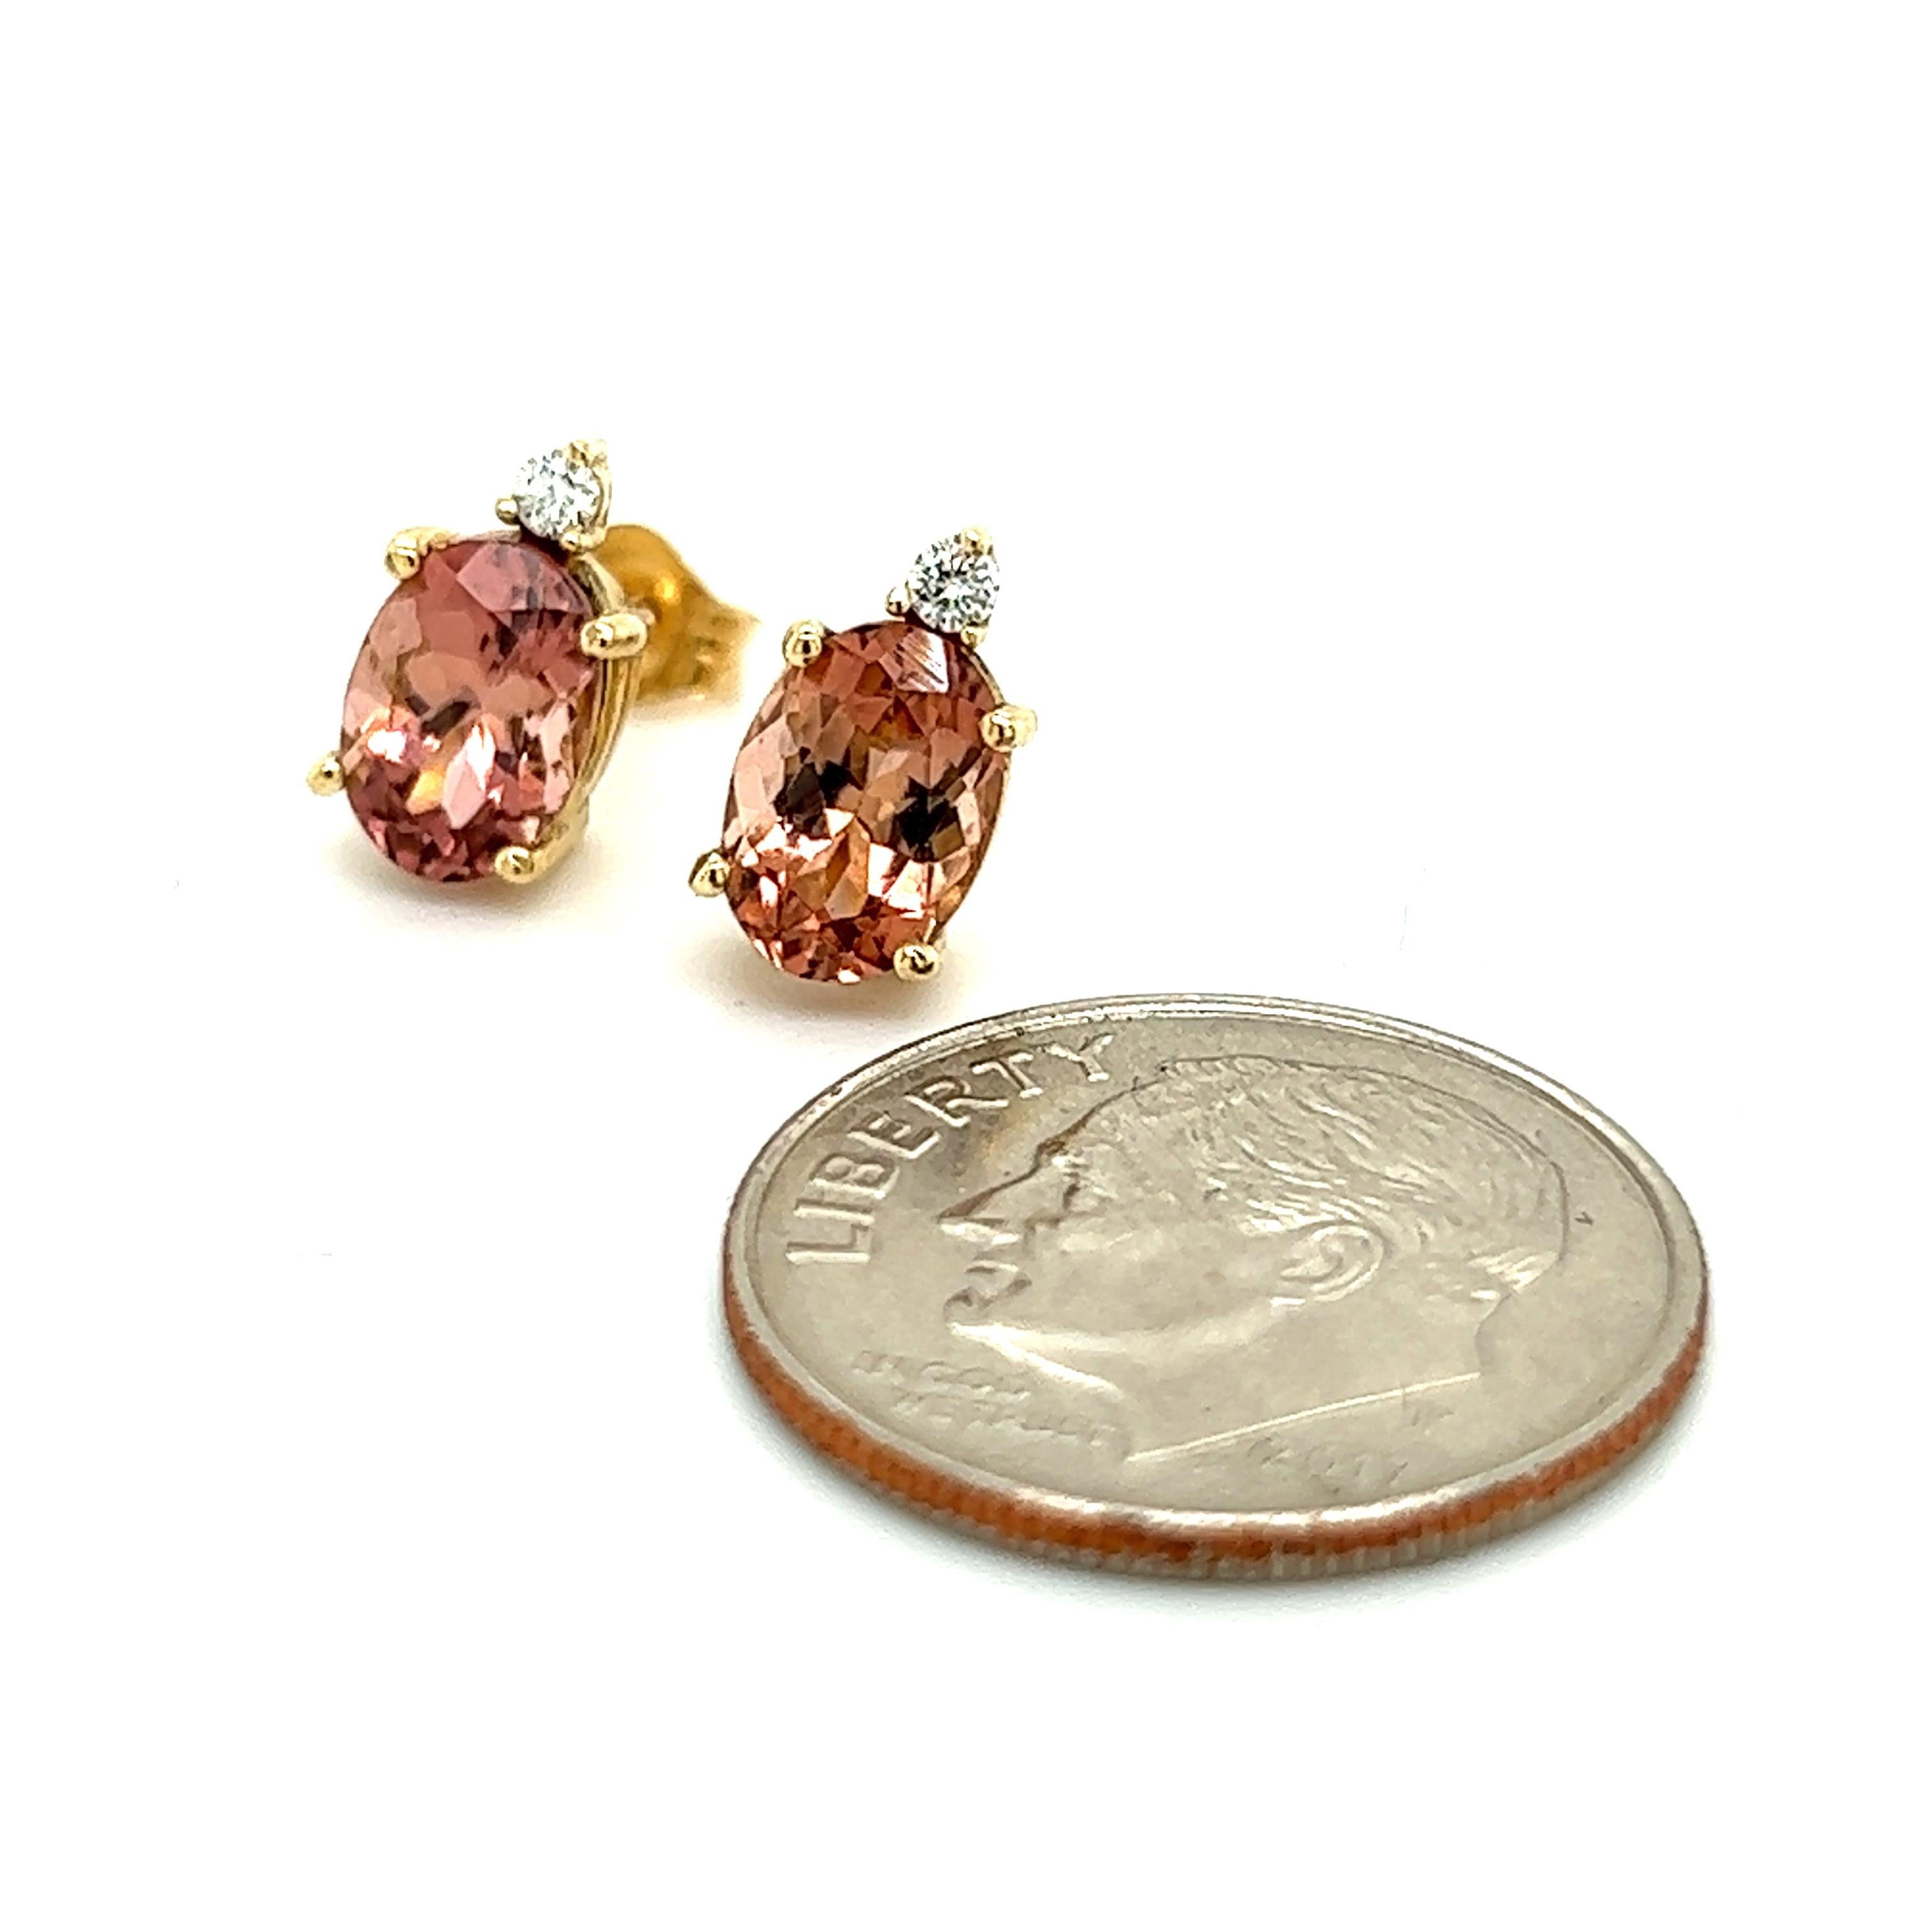 Natural Tourmaline Diamond Stud Earrings 14k Y Gold 1.76 TCW Certified $1,690 121431

Nothing says, “I Love you” more than Diamonds and Pearls!

These Tourmaline earrings have been Certified, Inspected, and Appraised by Gemological Appraisal